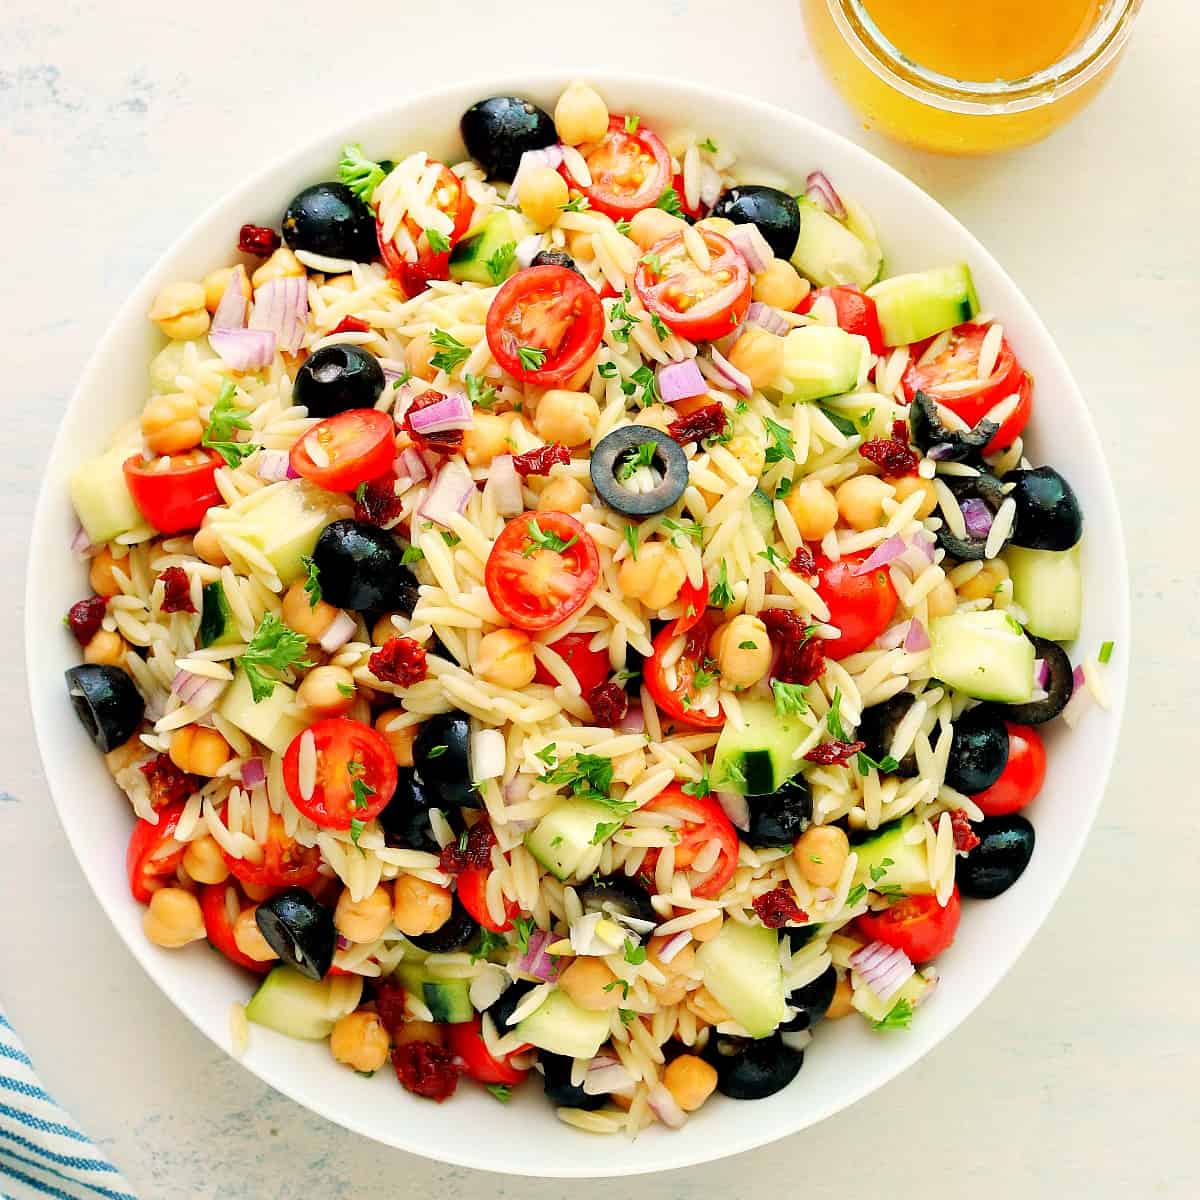 Pasta salad with orzo in a bowl.